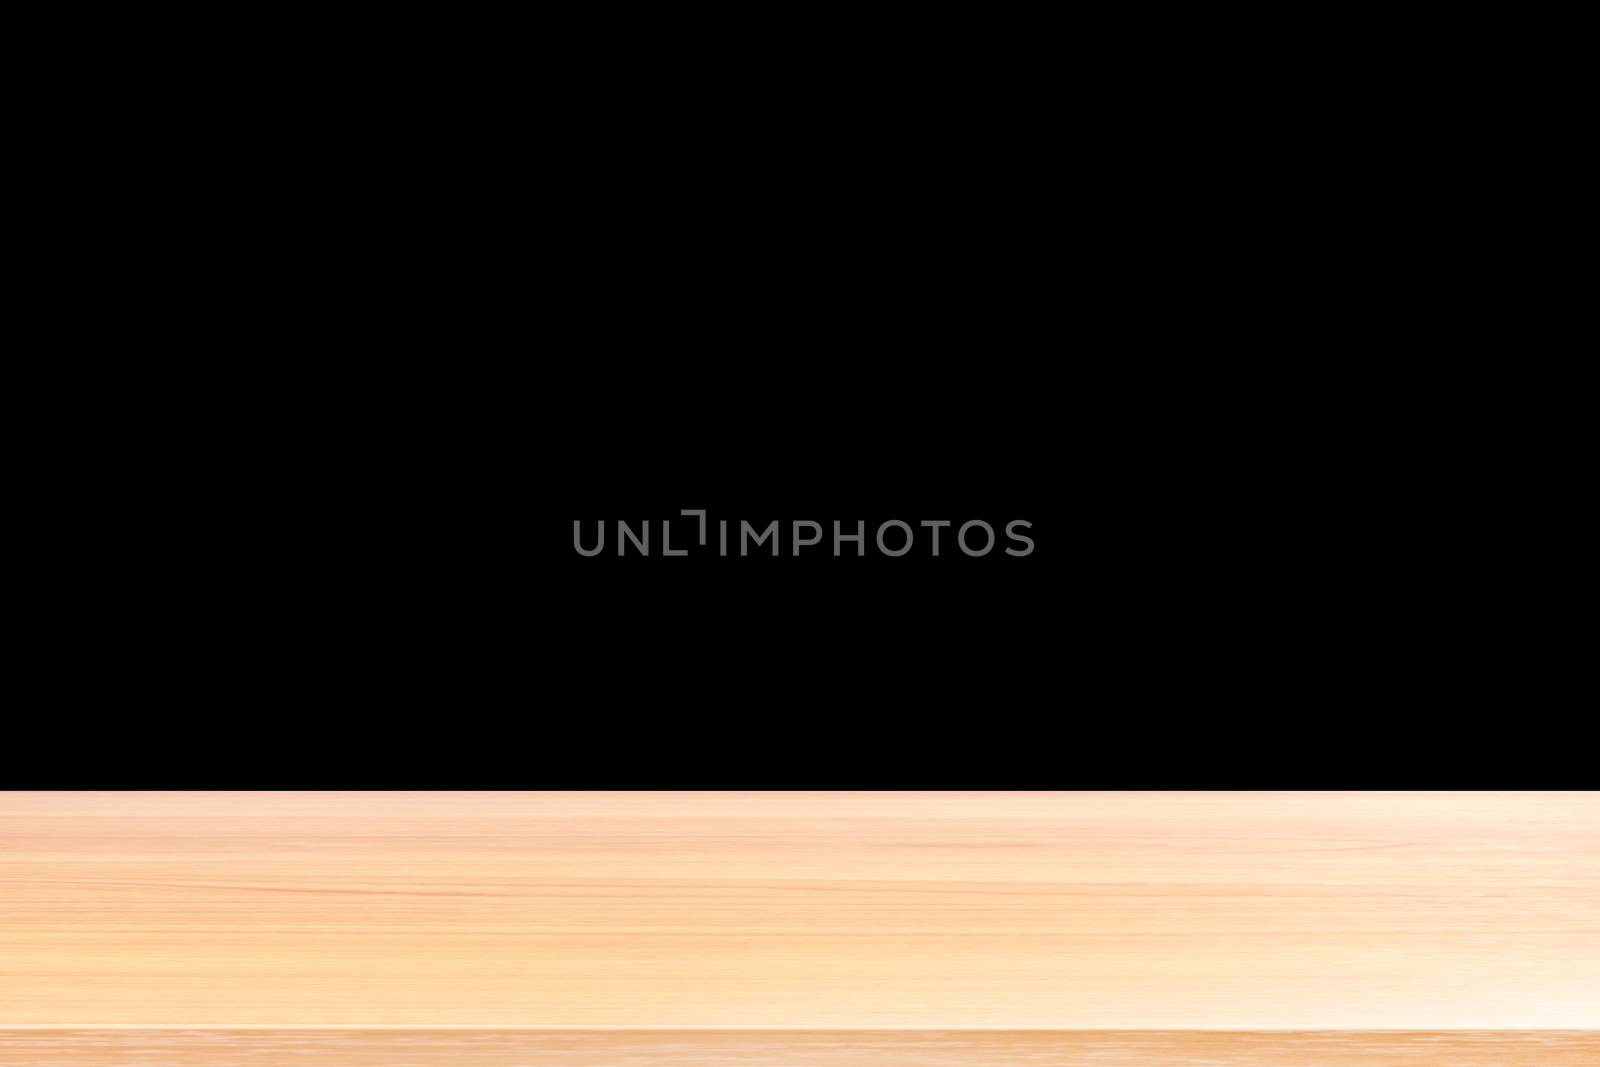 wood floors and black background, wood table board empty in front isolated black background, wooden plank blank on black background with perspective brown wood table for mock up display products by cgdeaw